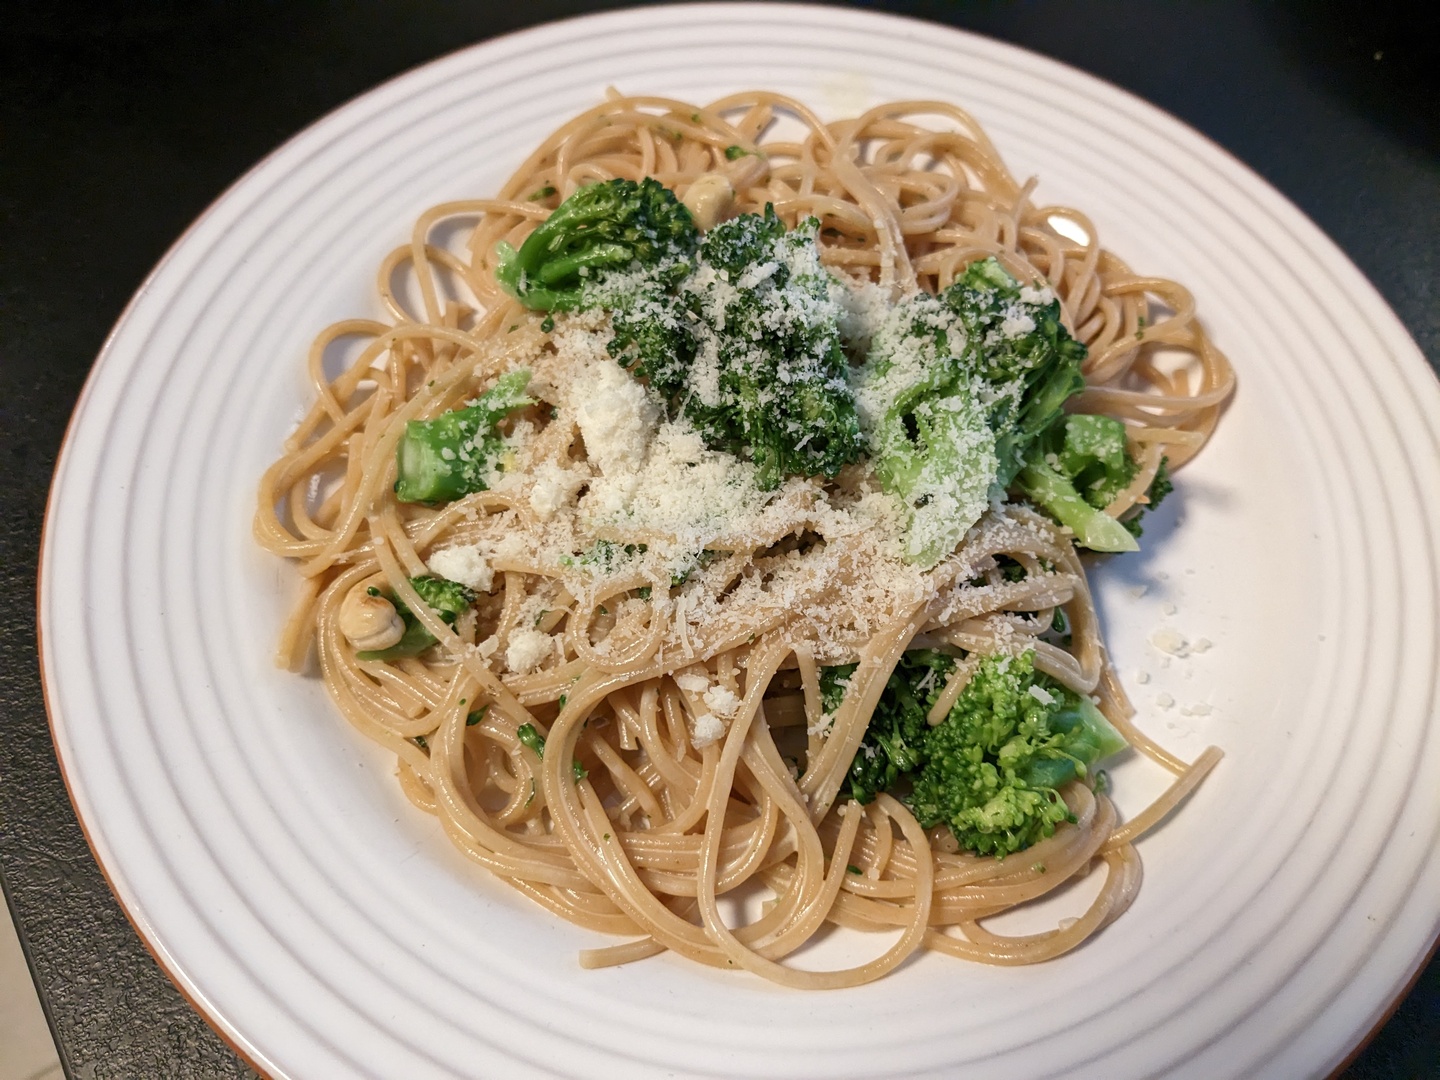 Pasta with Broccoli and Cashew